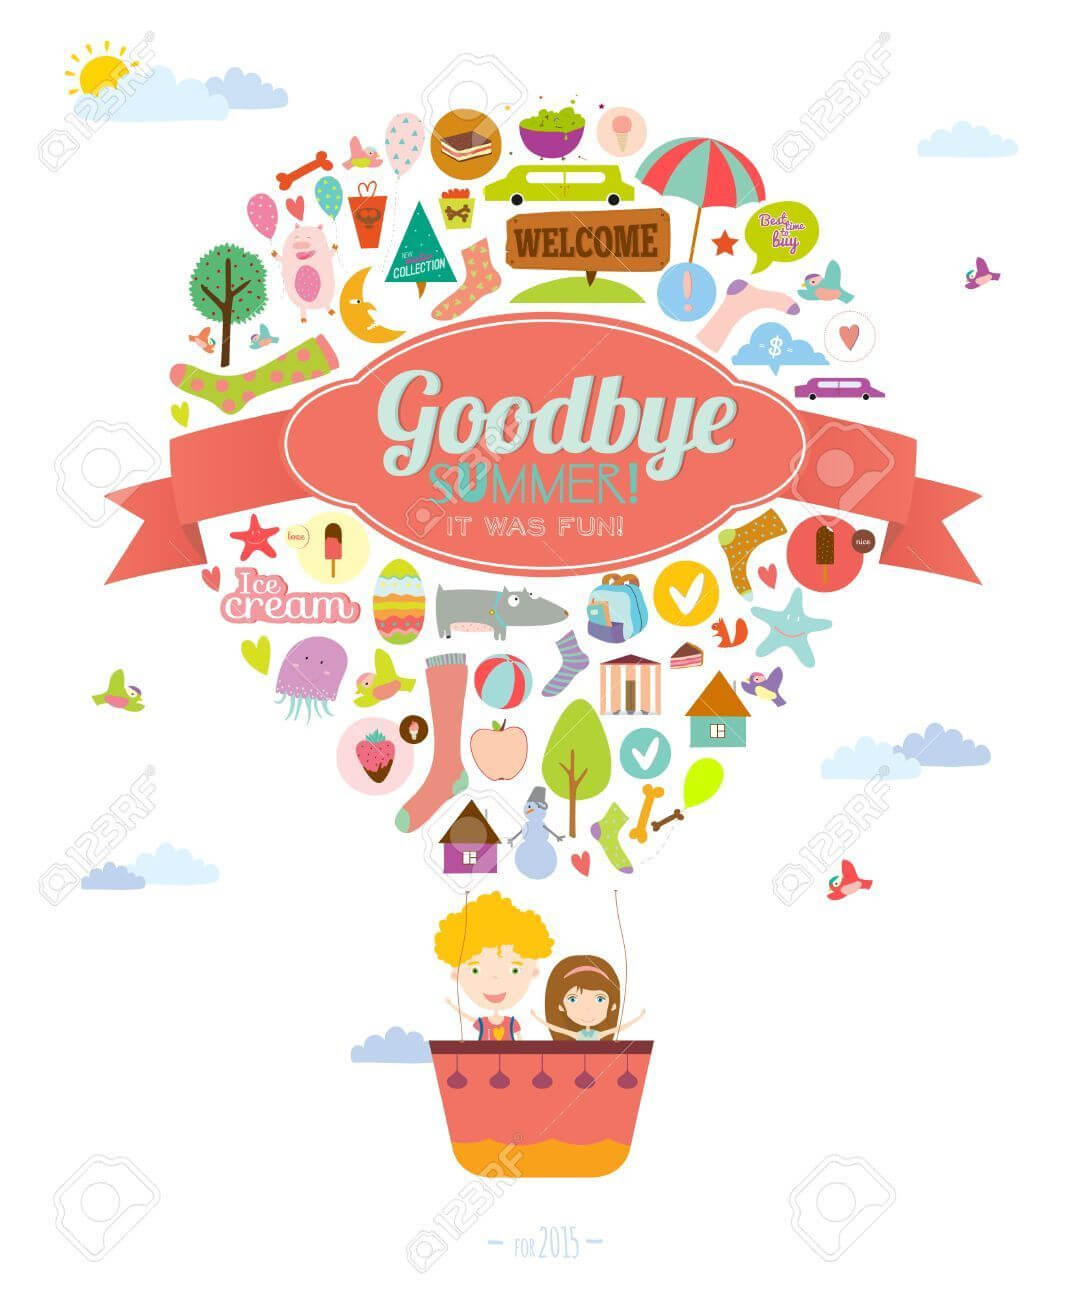 Top Printable Good Bye Cards | Graham Website Within Goodbye Card Template